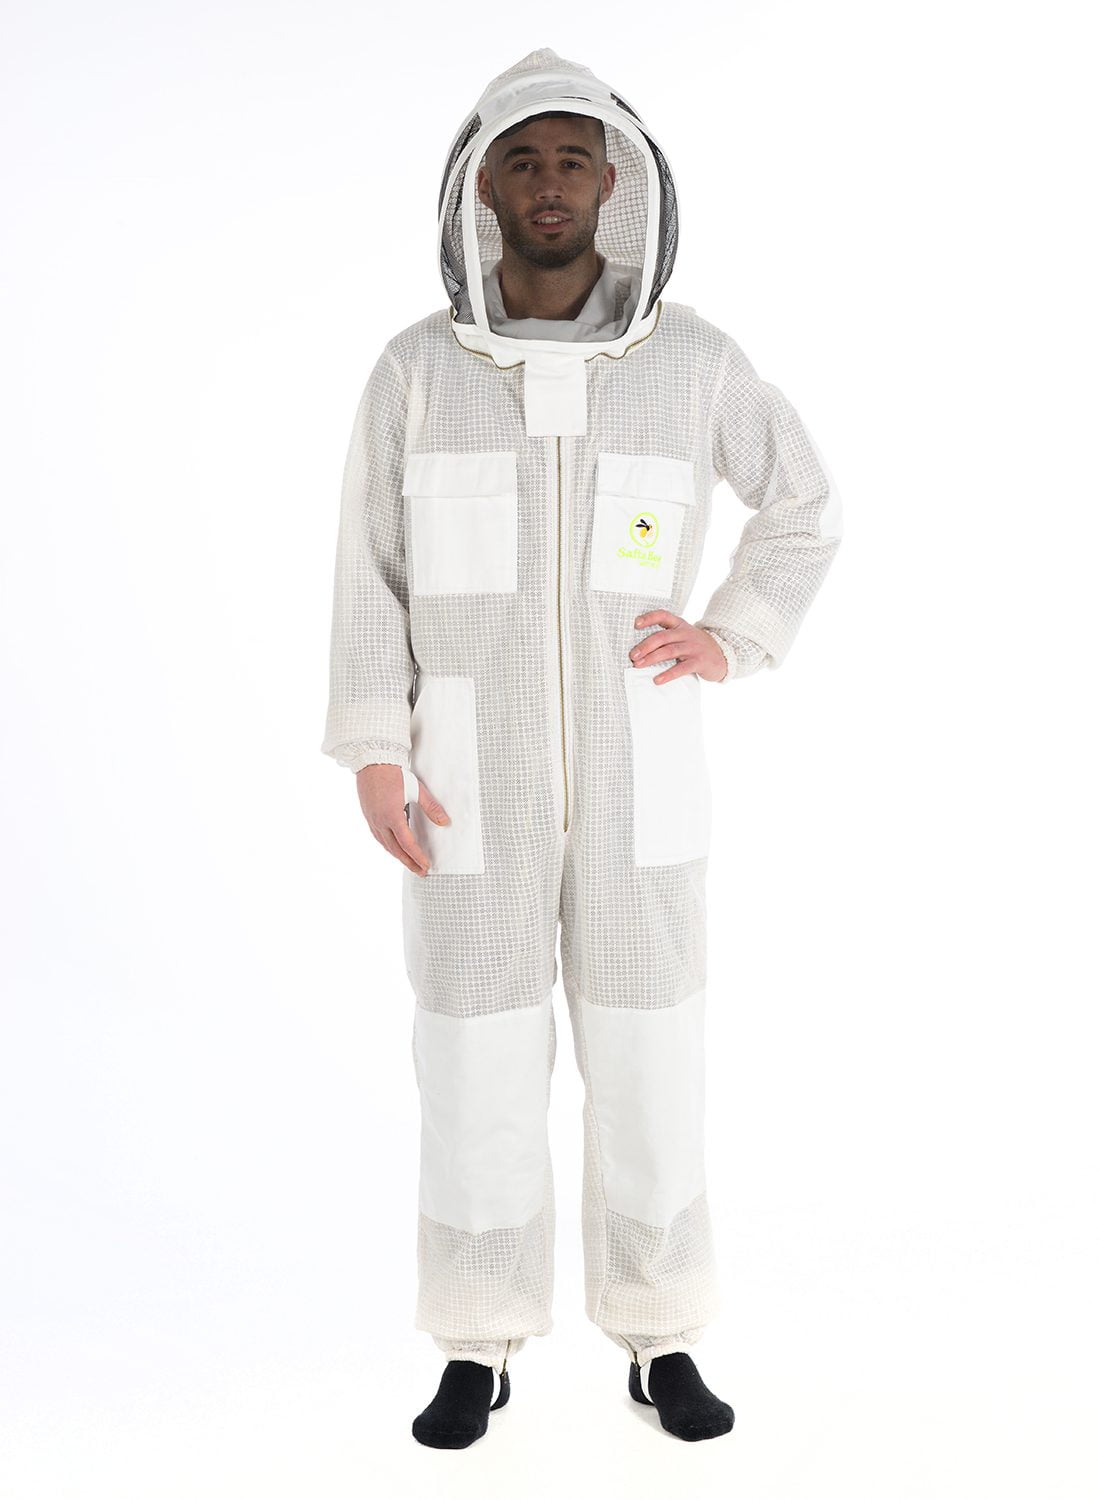 Details about   Ultra Ventilated 3 Layers Pilot Beekeeping Suit Extra Ordinary Features Size _ M 